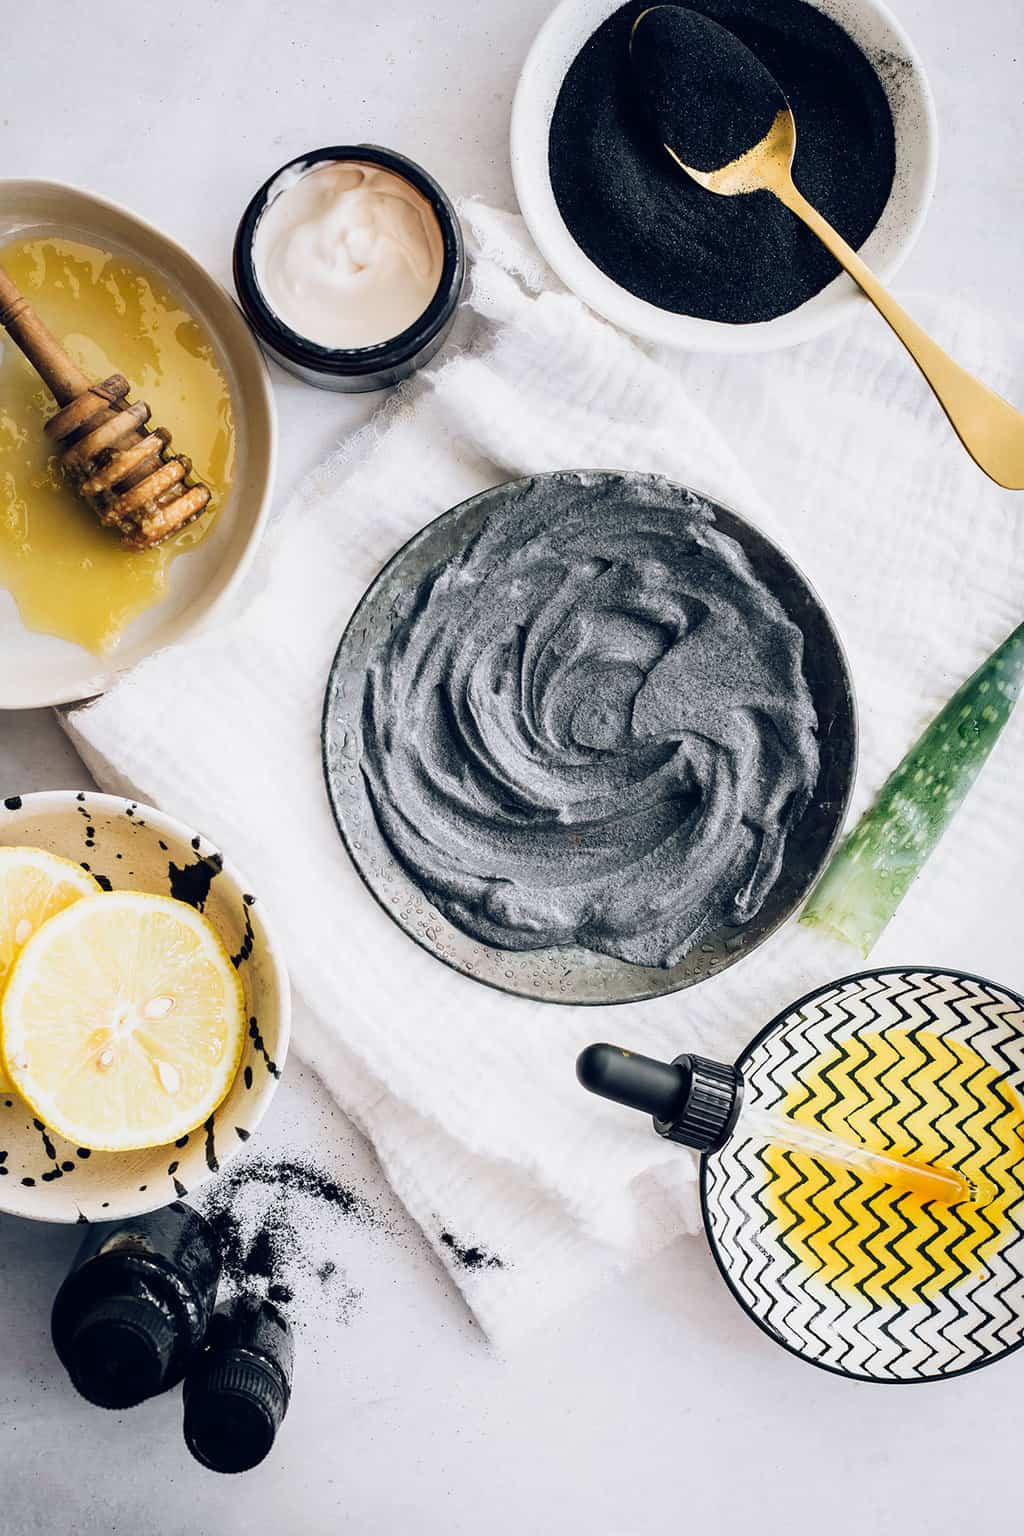 DIY Activated Charcoal Mask
 8 Detoxifying Charcoal Face Masks You Can Make at Home